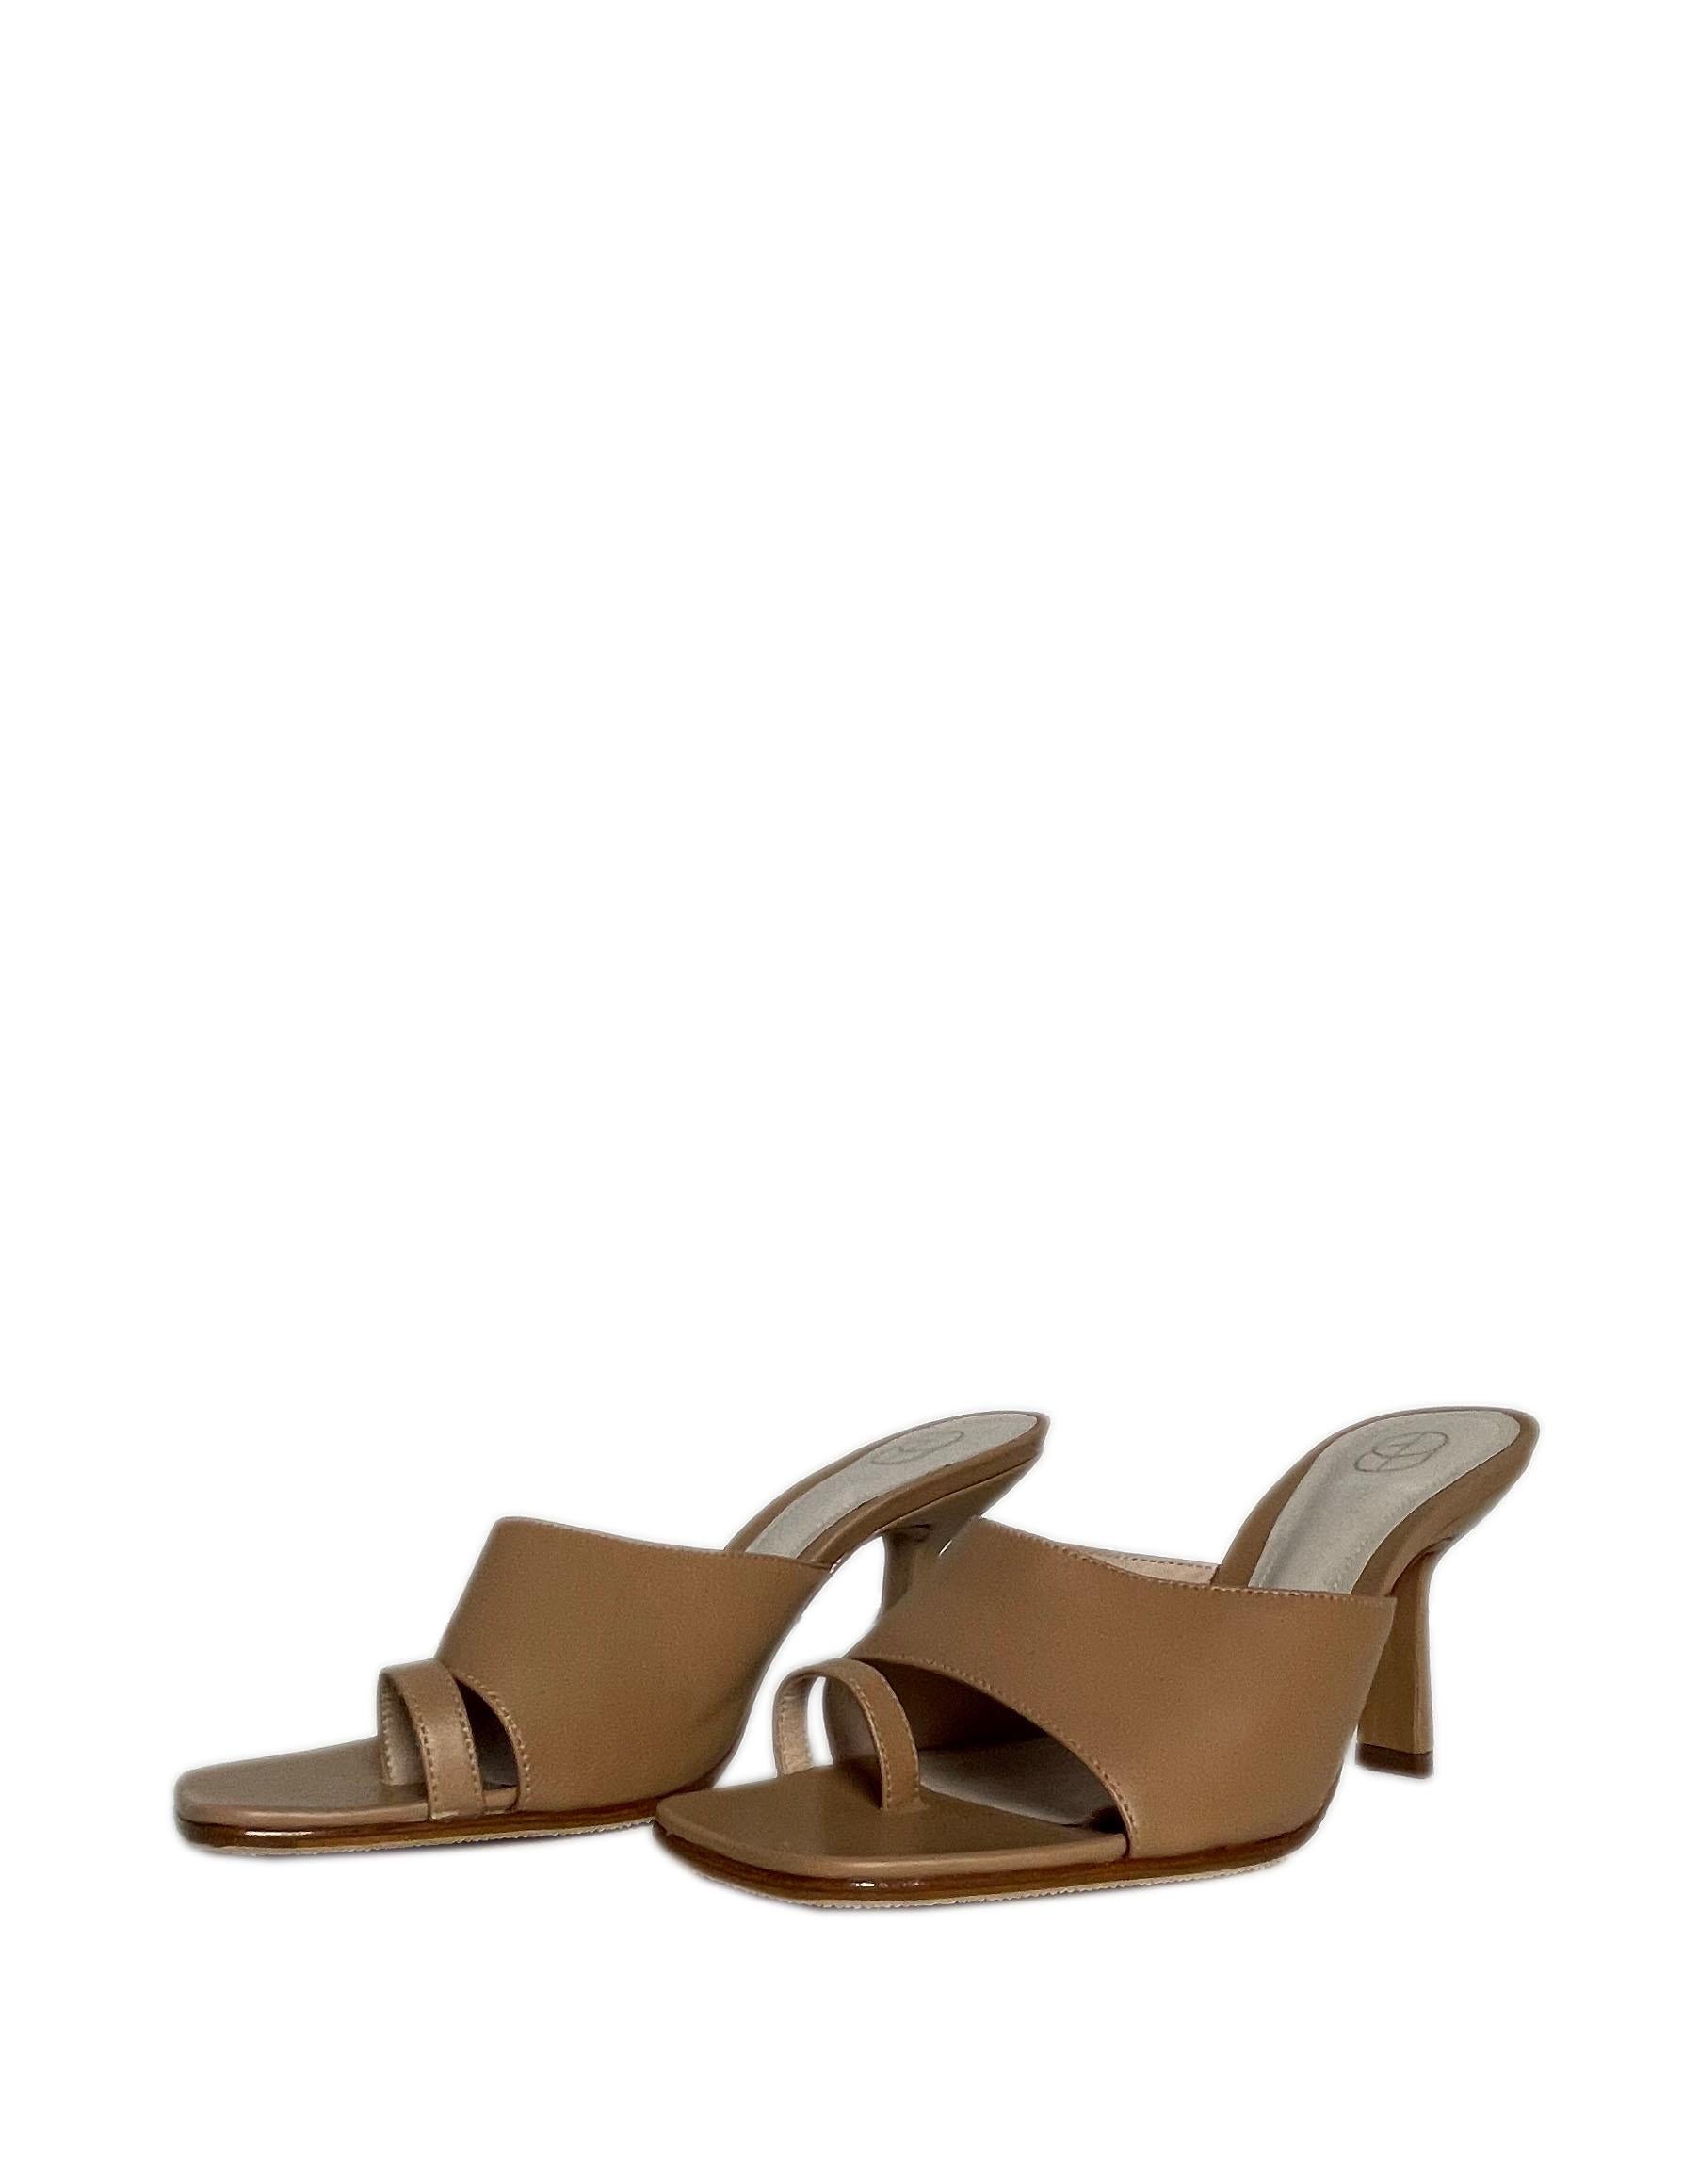 Porte & Paire Sand Leather Mules Heels 

Made in: Italy
Materials: Leather
Color: Beige/ 